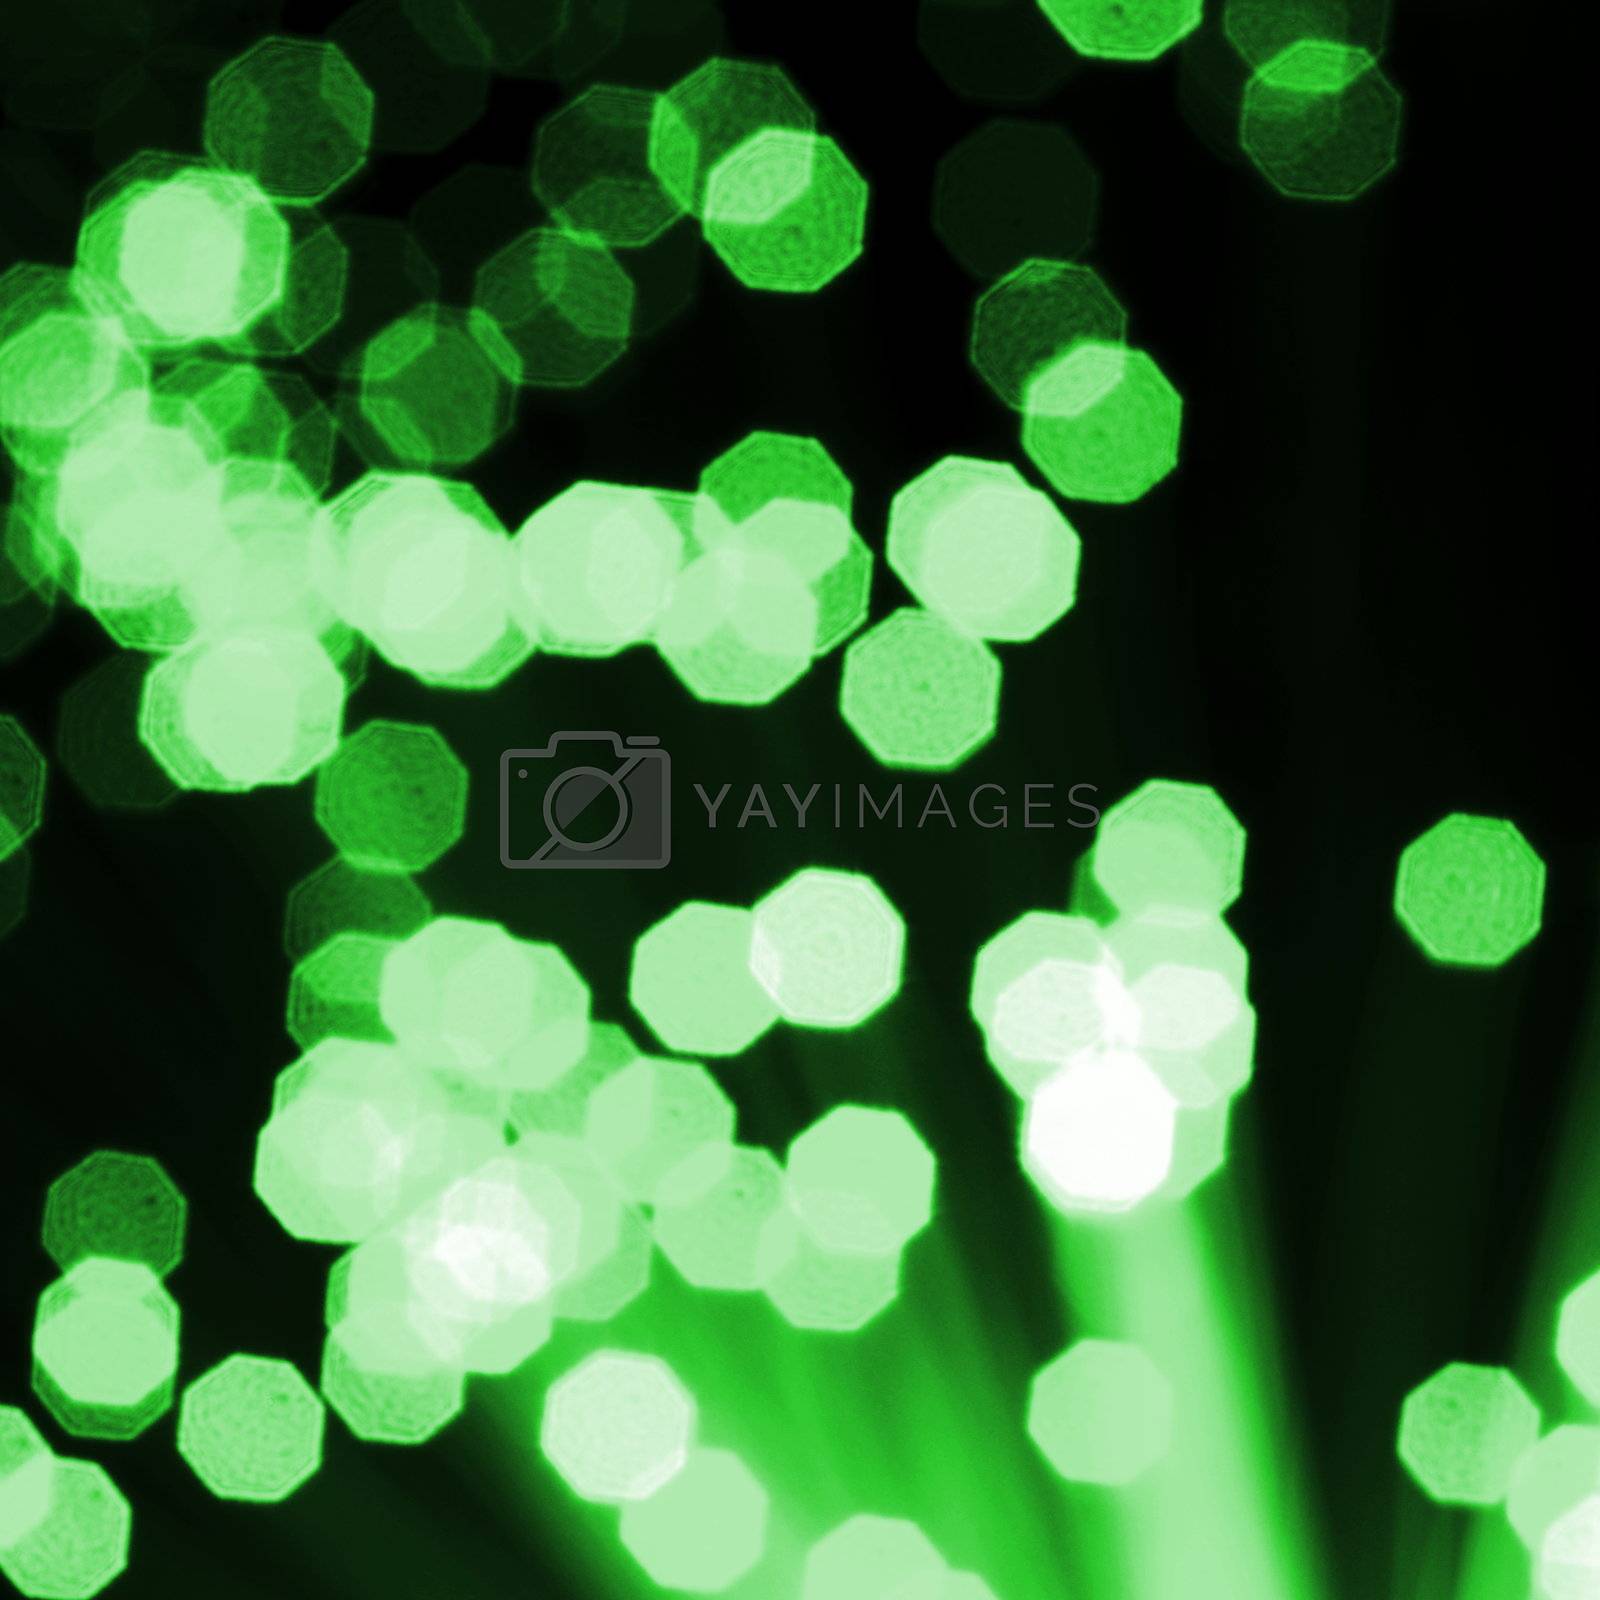 Royalty free image of abstract bokeh lights background by gunnar3000